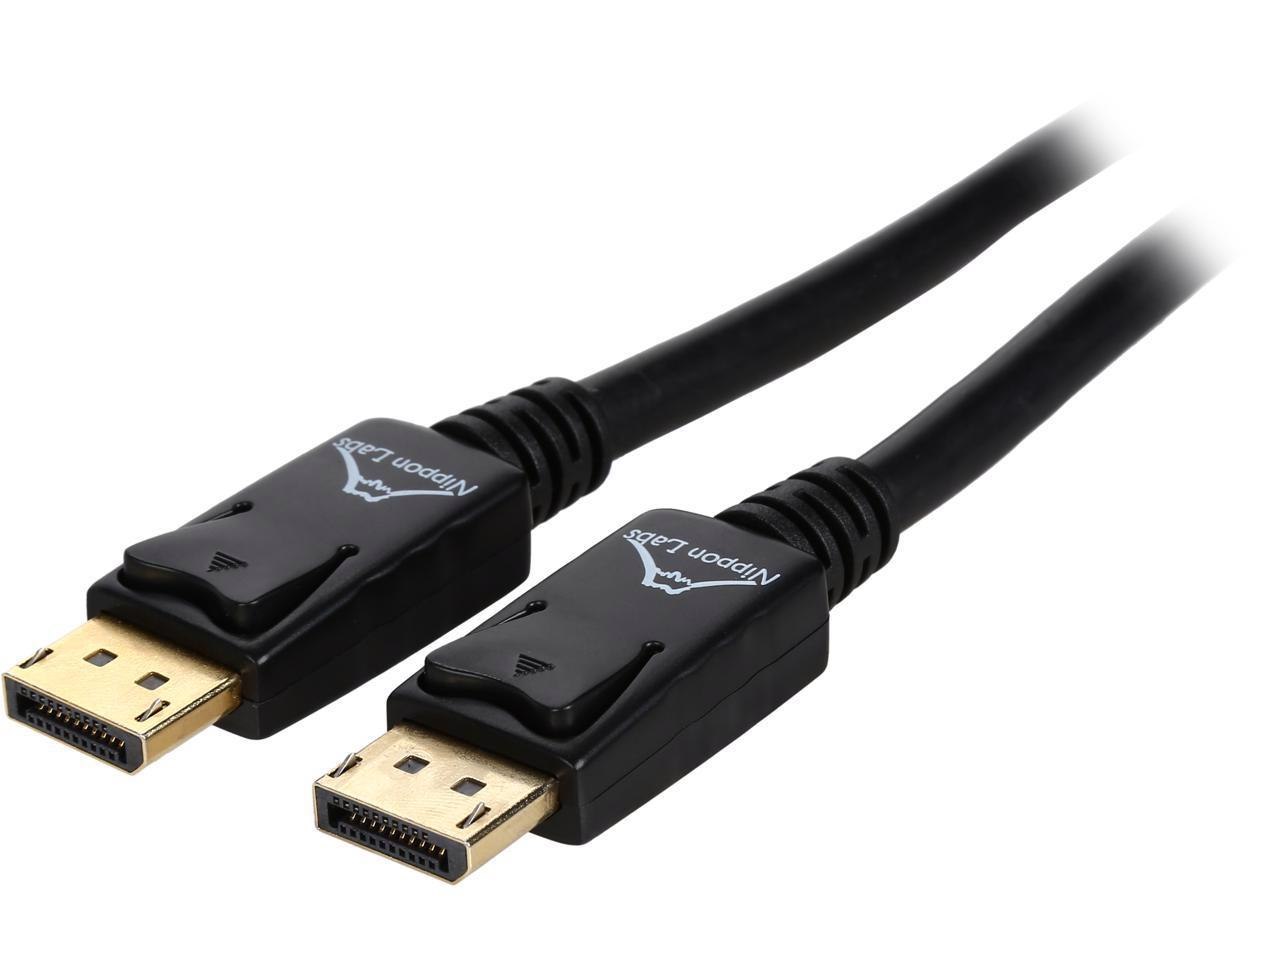 Nippon Labs DP-10-BR2 10 FT. DP DisplayPort 1.2 HBR2 Male To Male Cable With Gold Plated Connectors